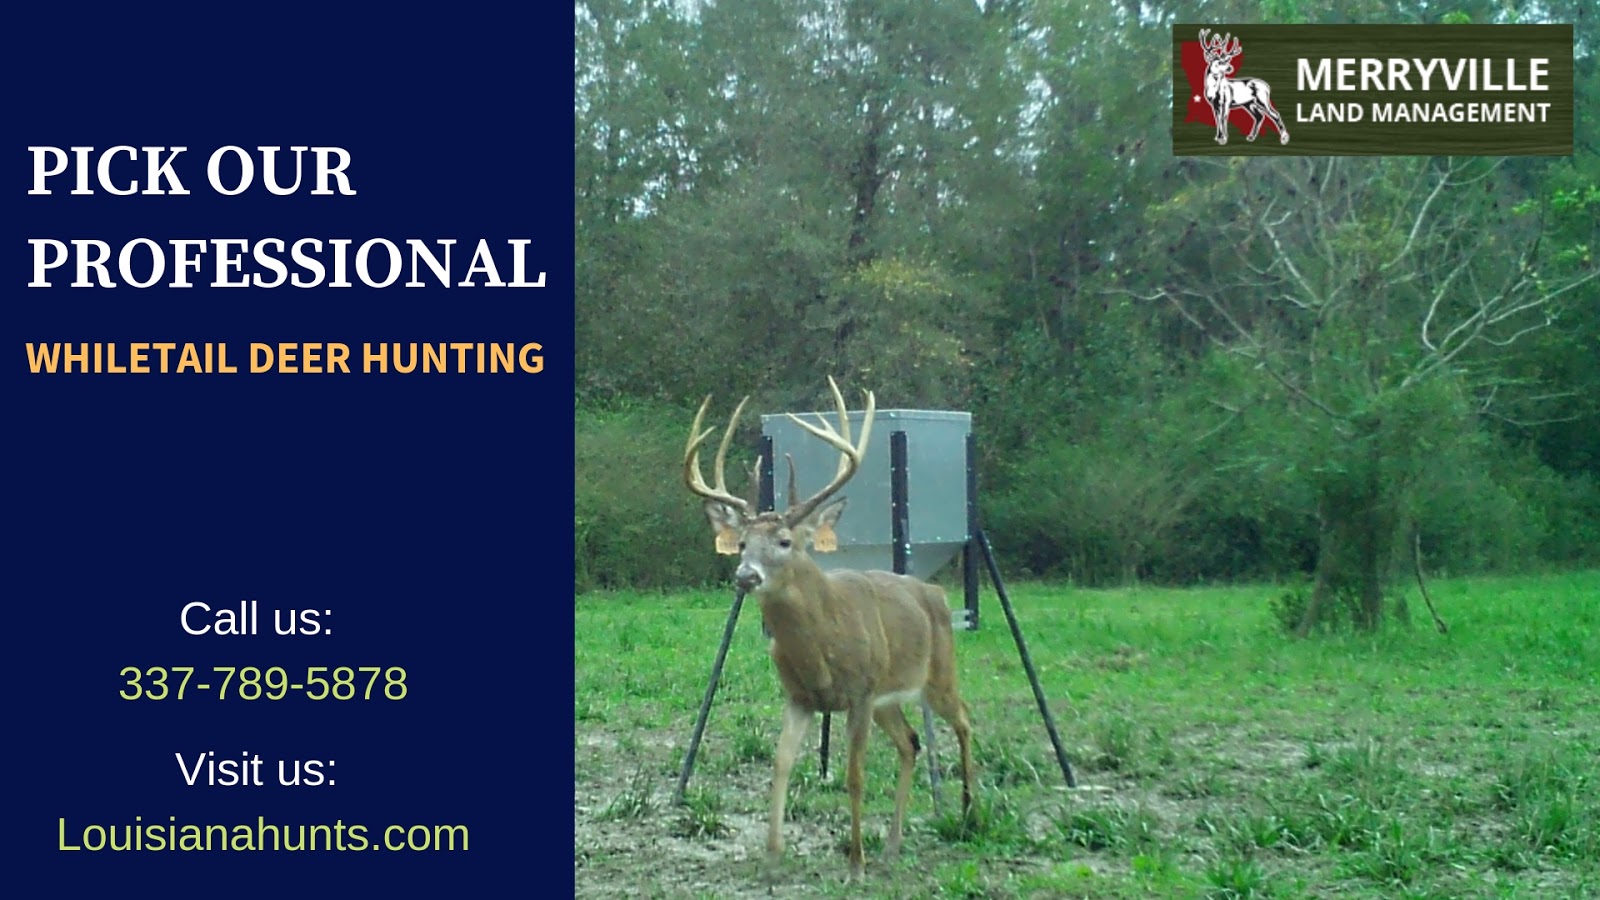 Pick Our Professional Whitetail Deer Hunting